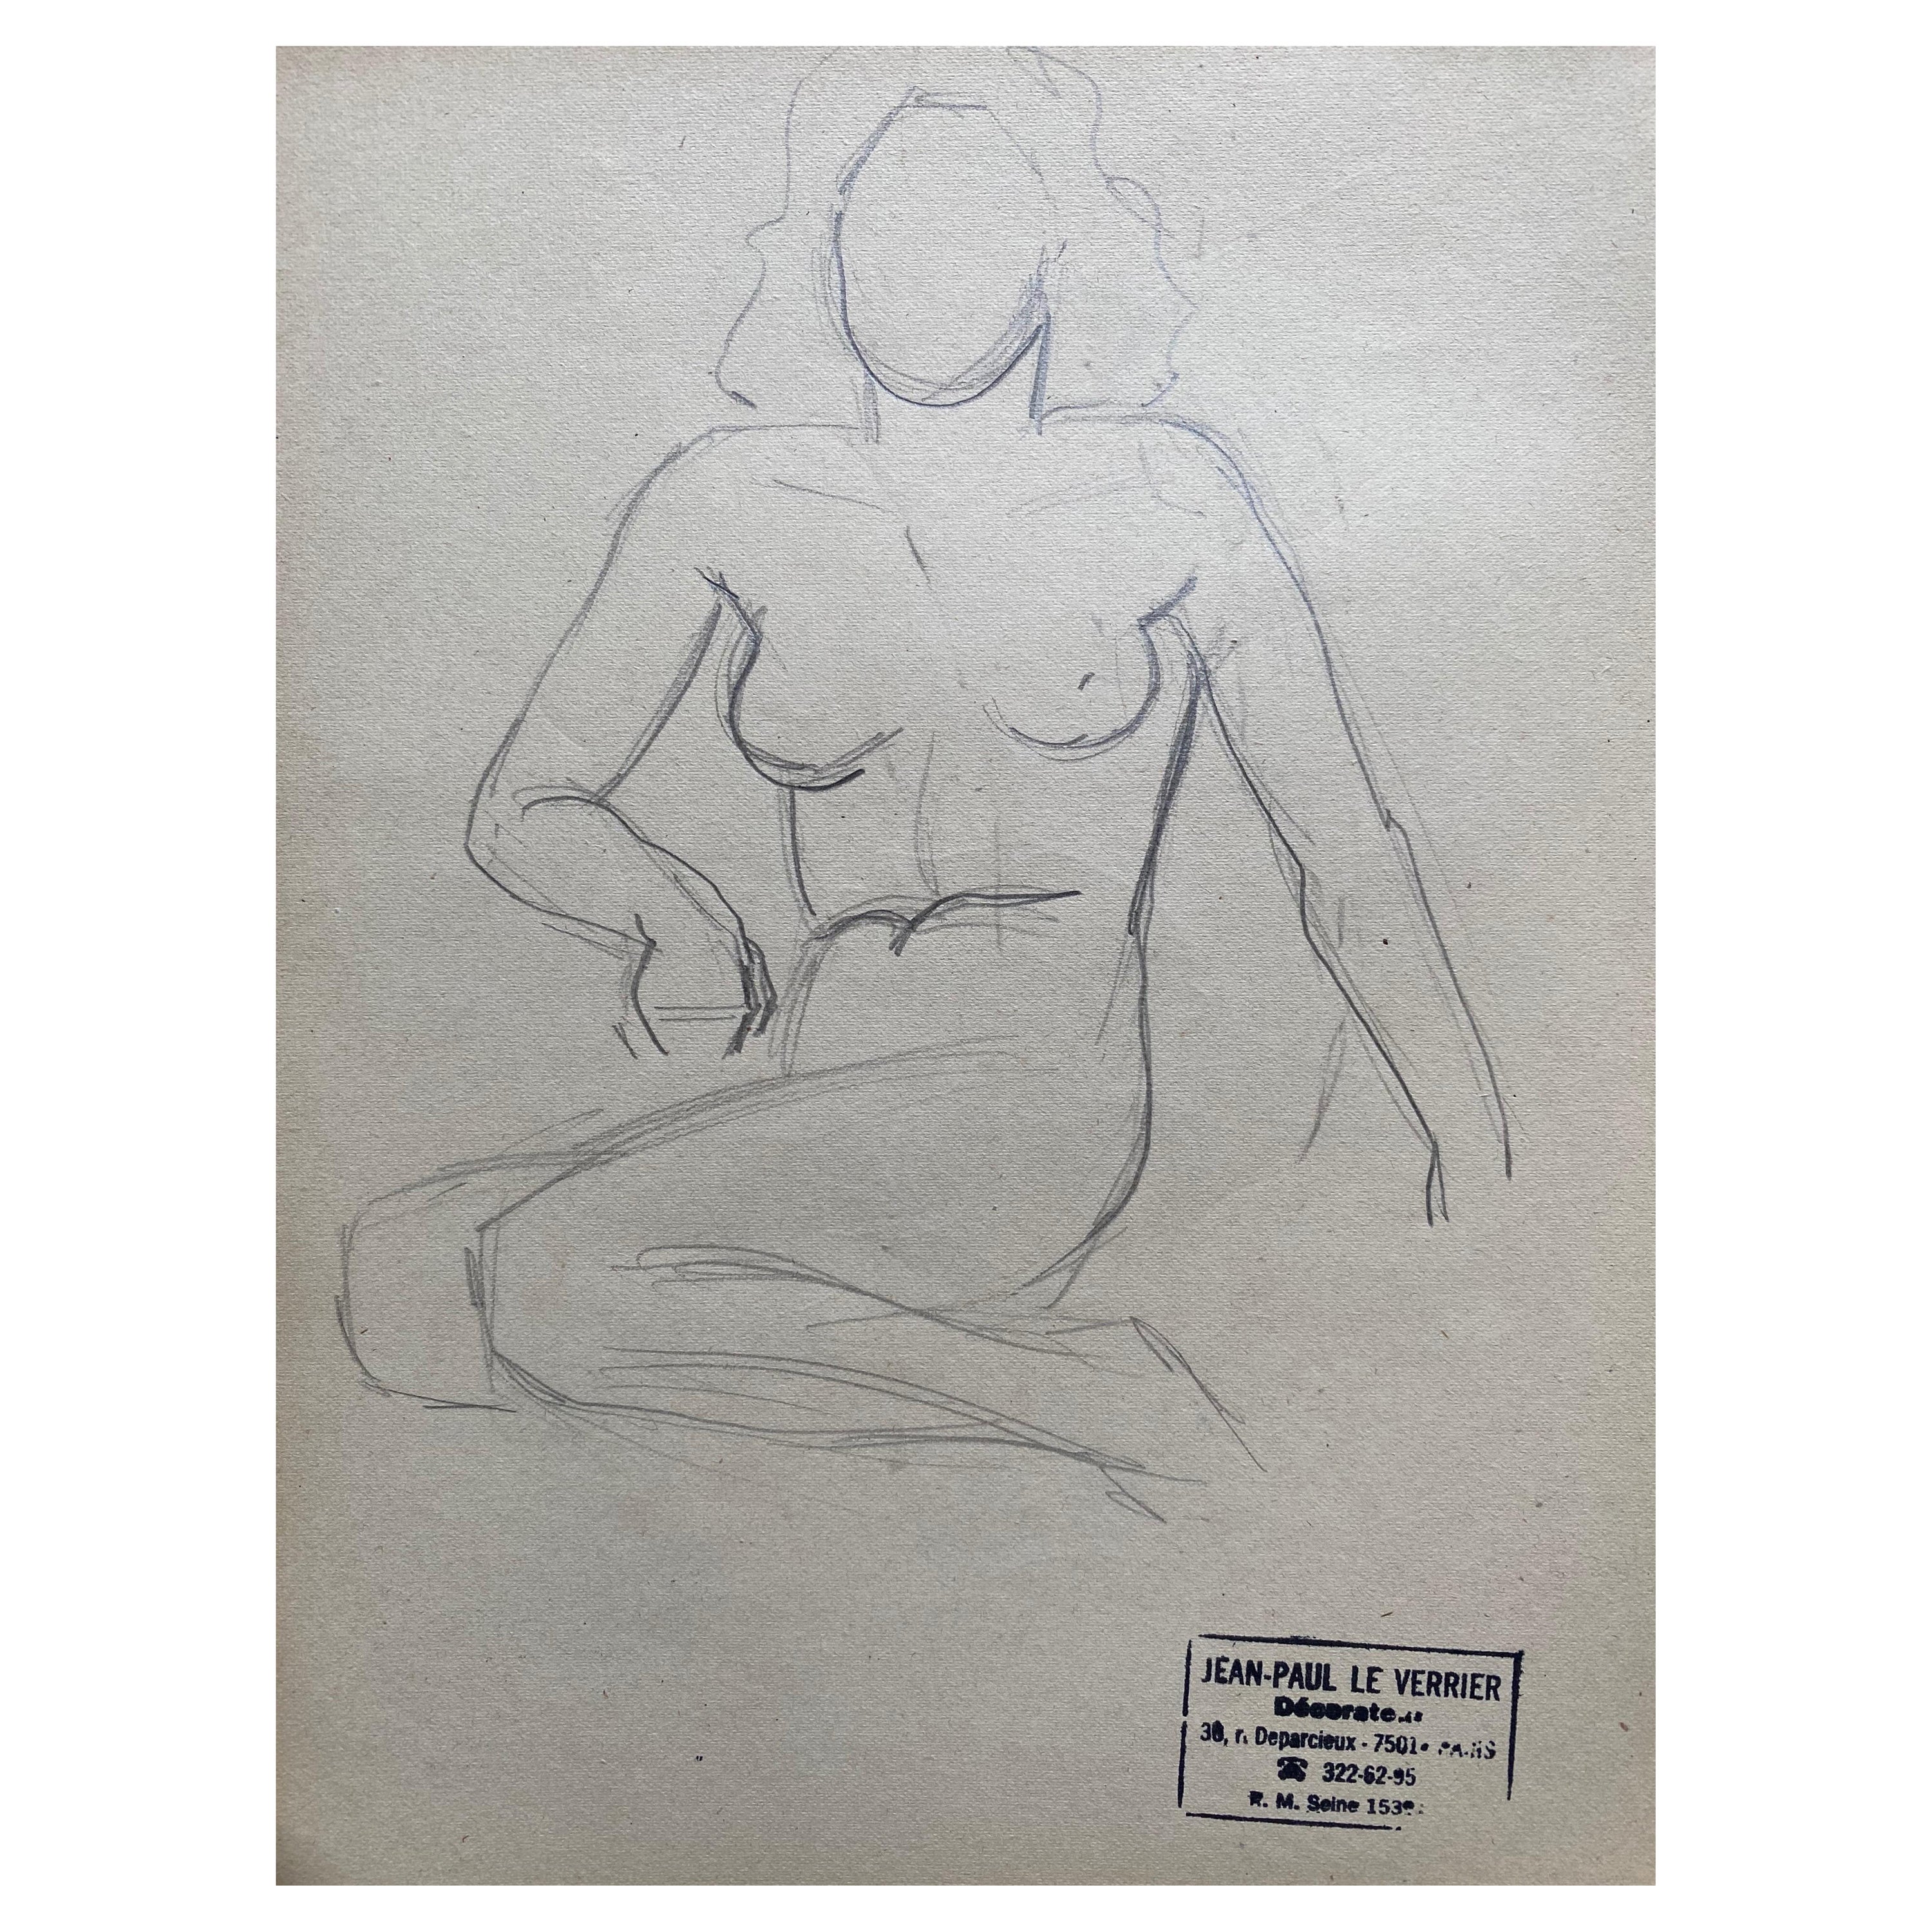 Mid 20th Century French Original Line Drawing Sketch Nude Lady, Stamped